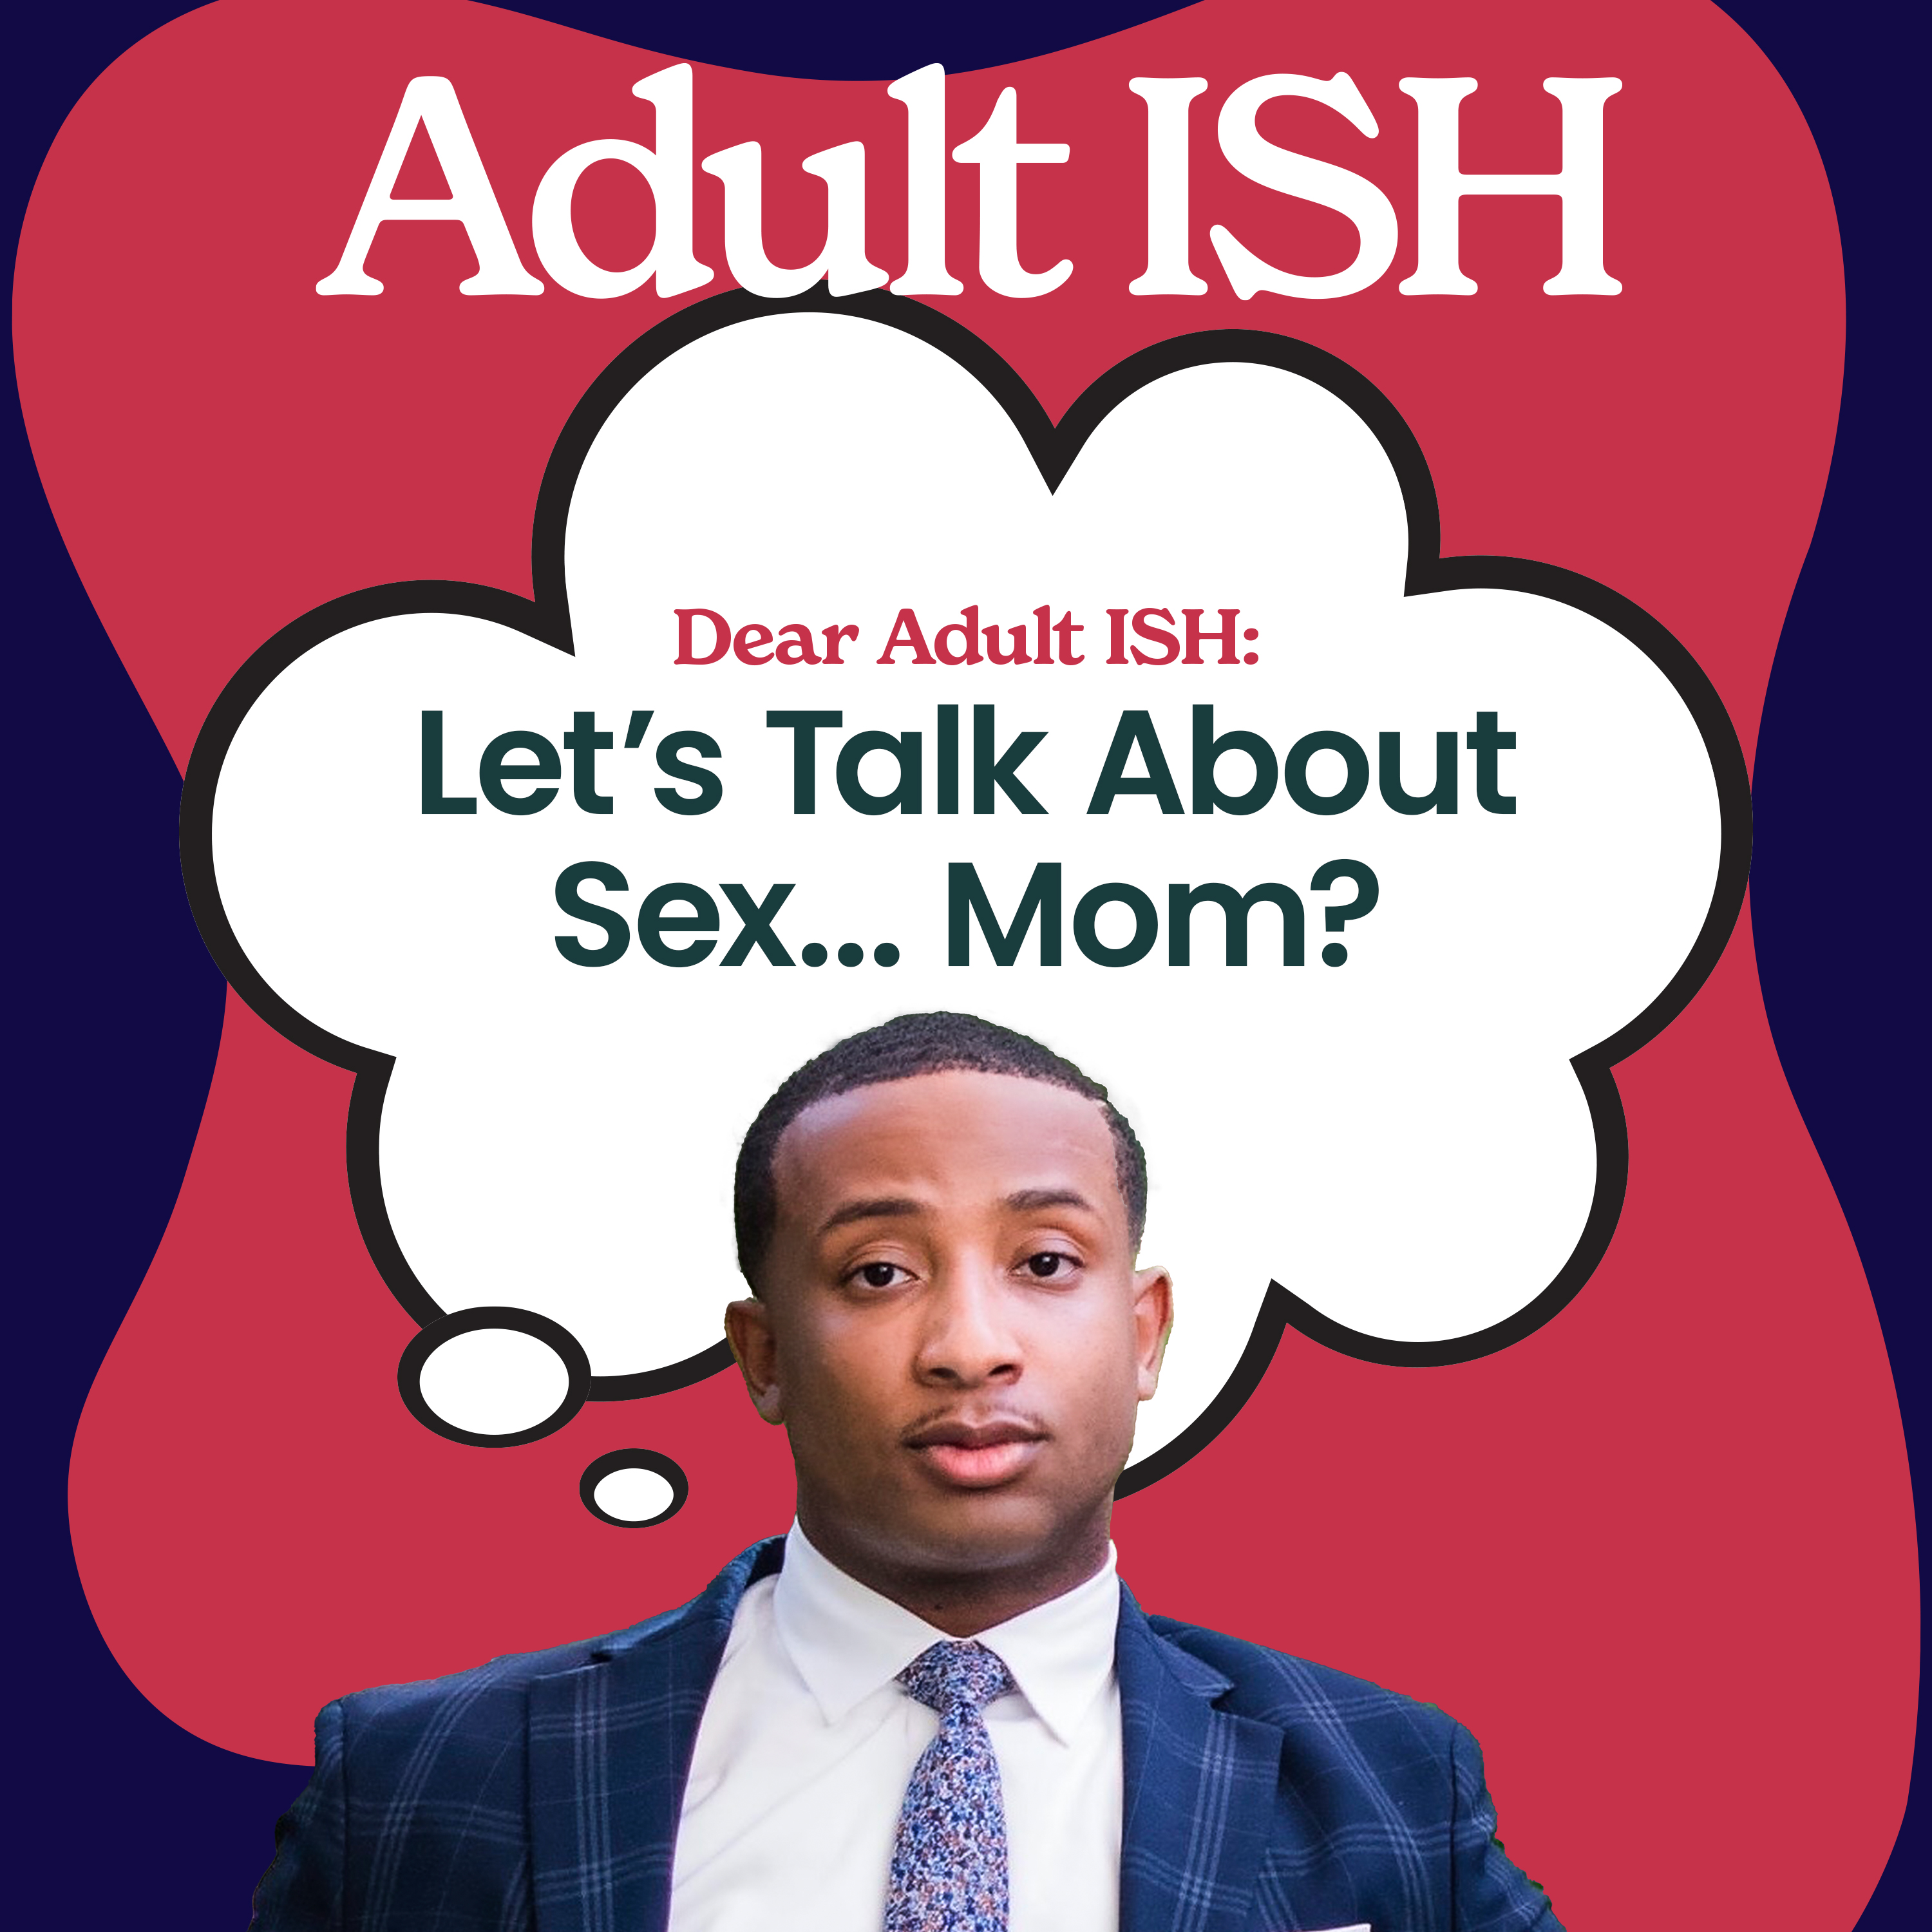 Dear Adult ISH: Let’s Talk About Sex… Mom?